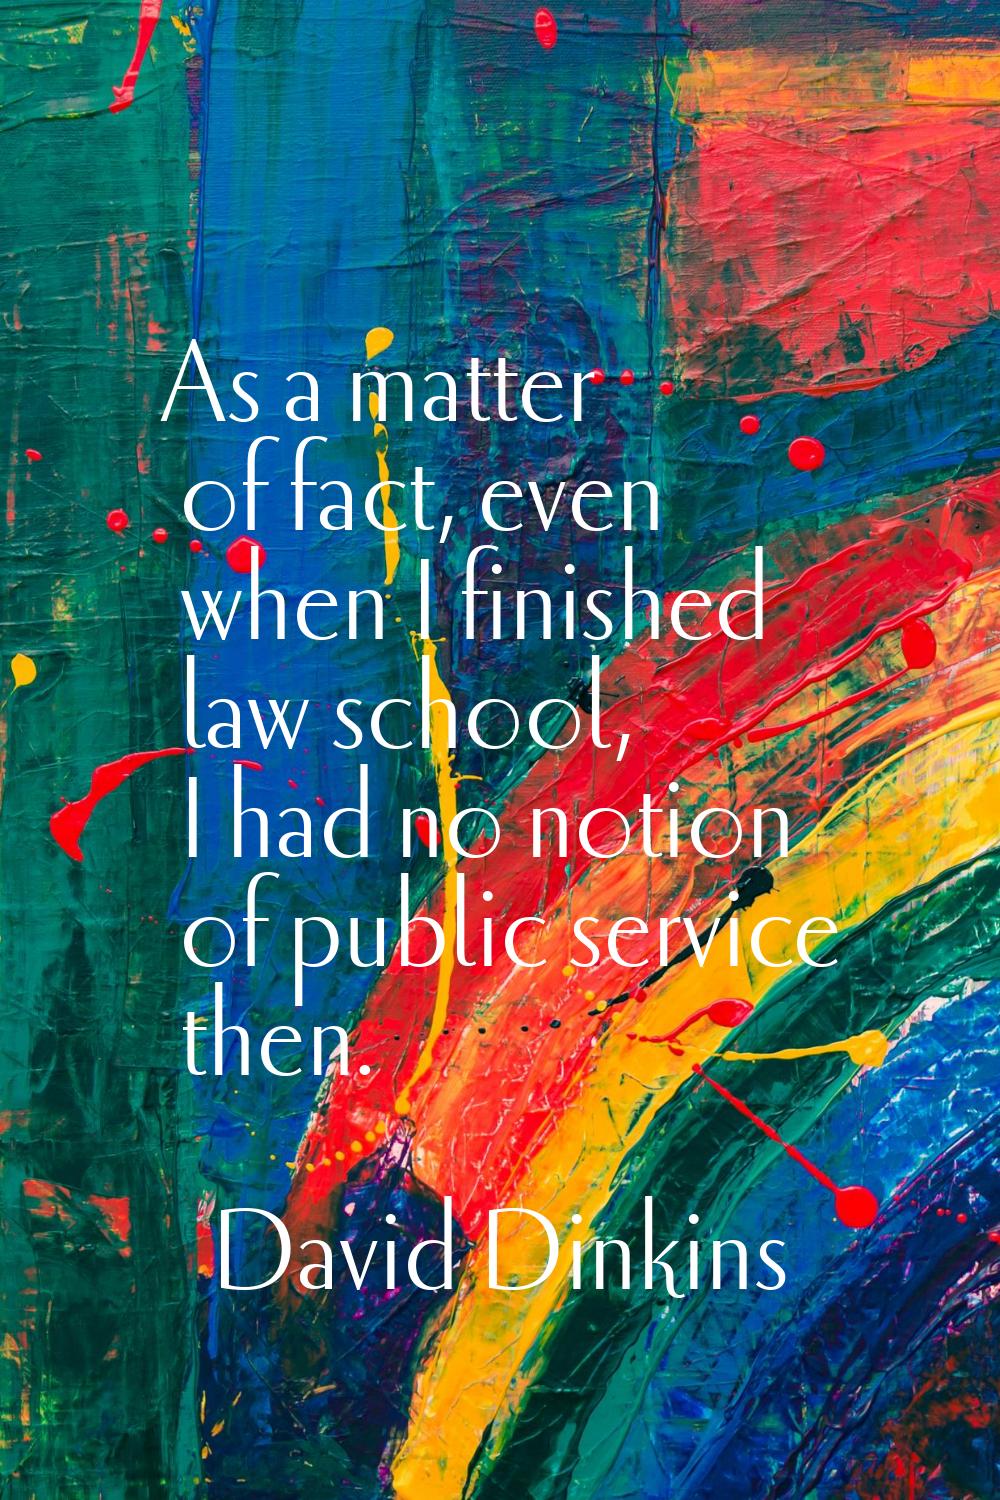 As a matter of fact, even when I finished law school, I had no notion of public service then.